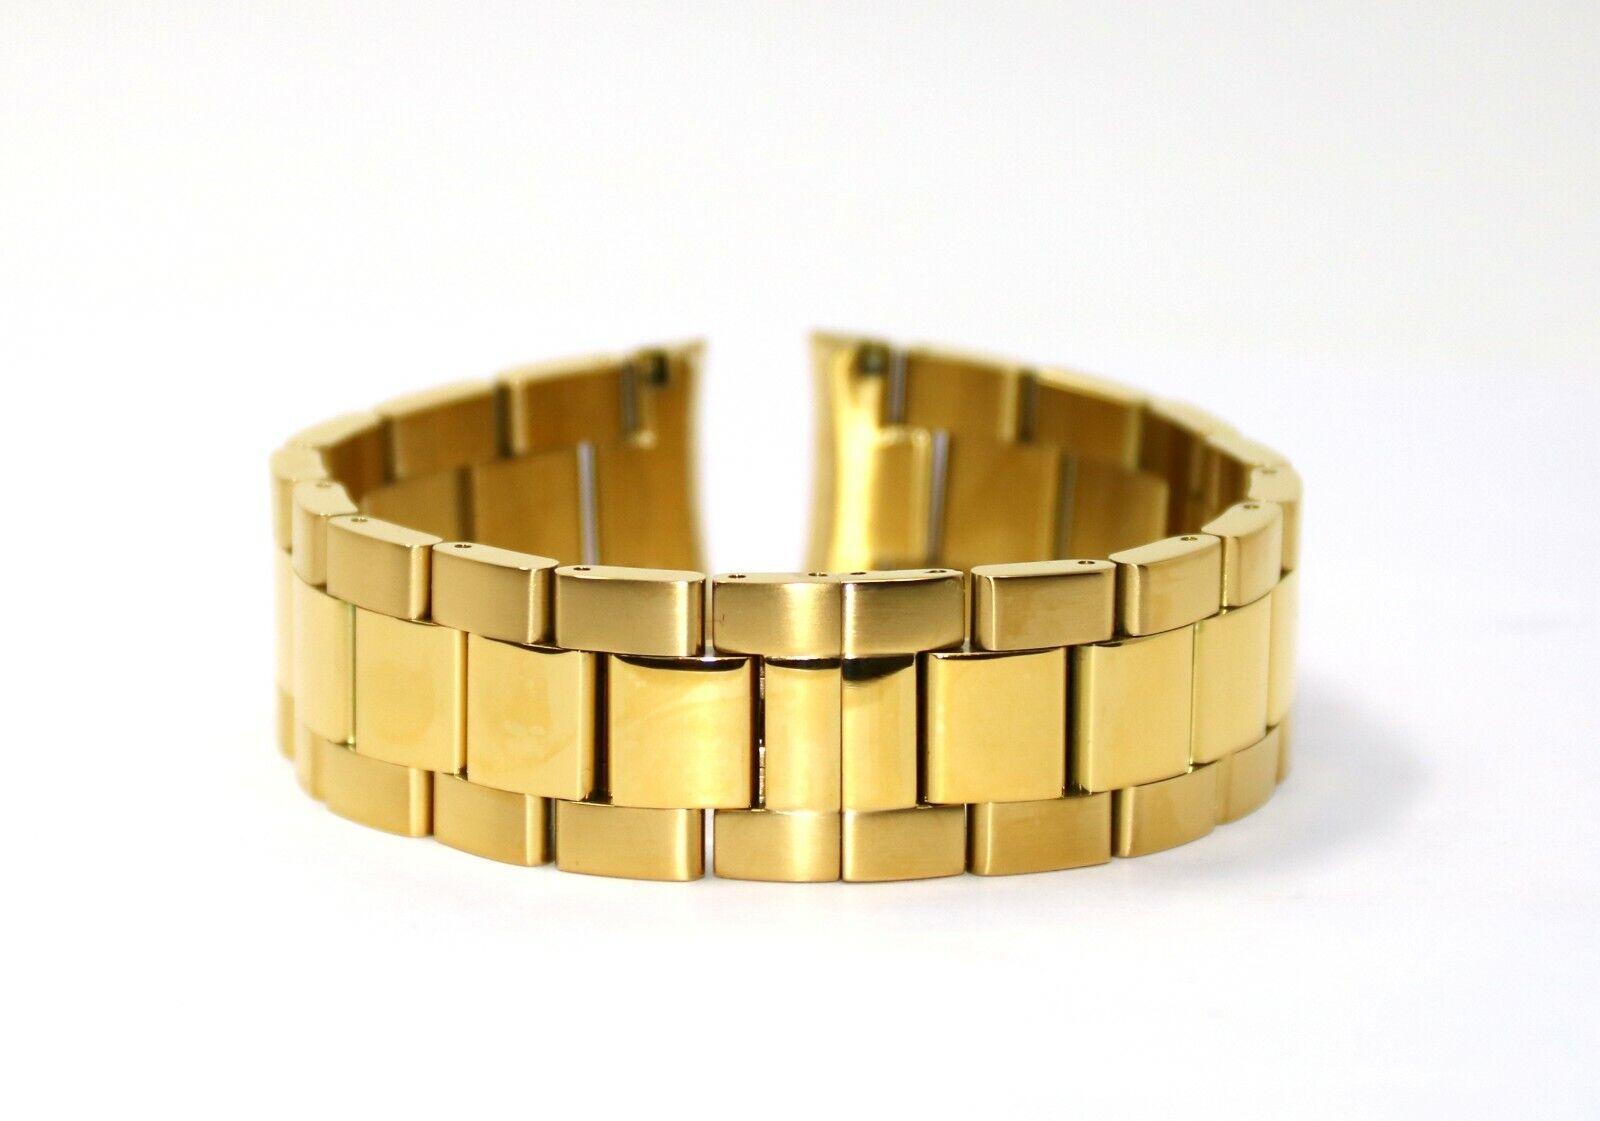 22mm GOLD Stainless Steel Watch Bracelet Band Strap for 40mm Marina 80014 NEW